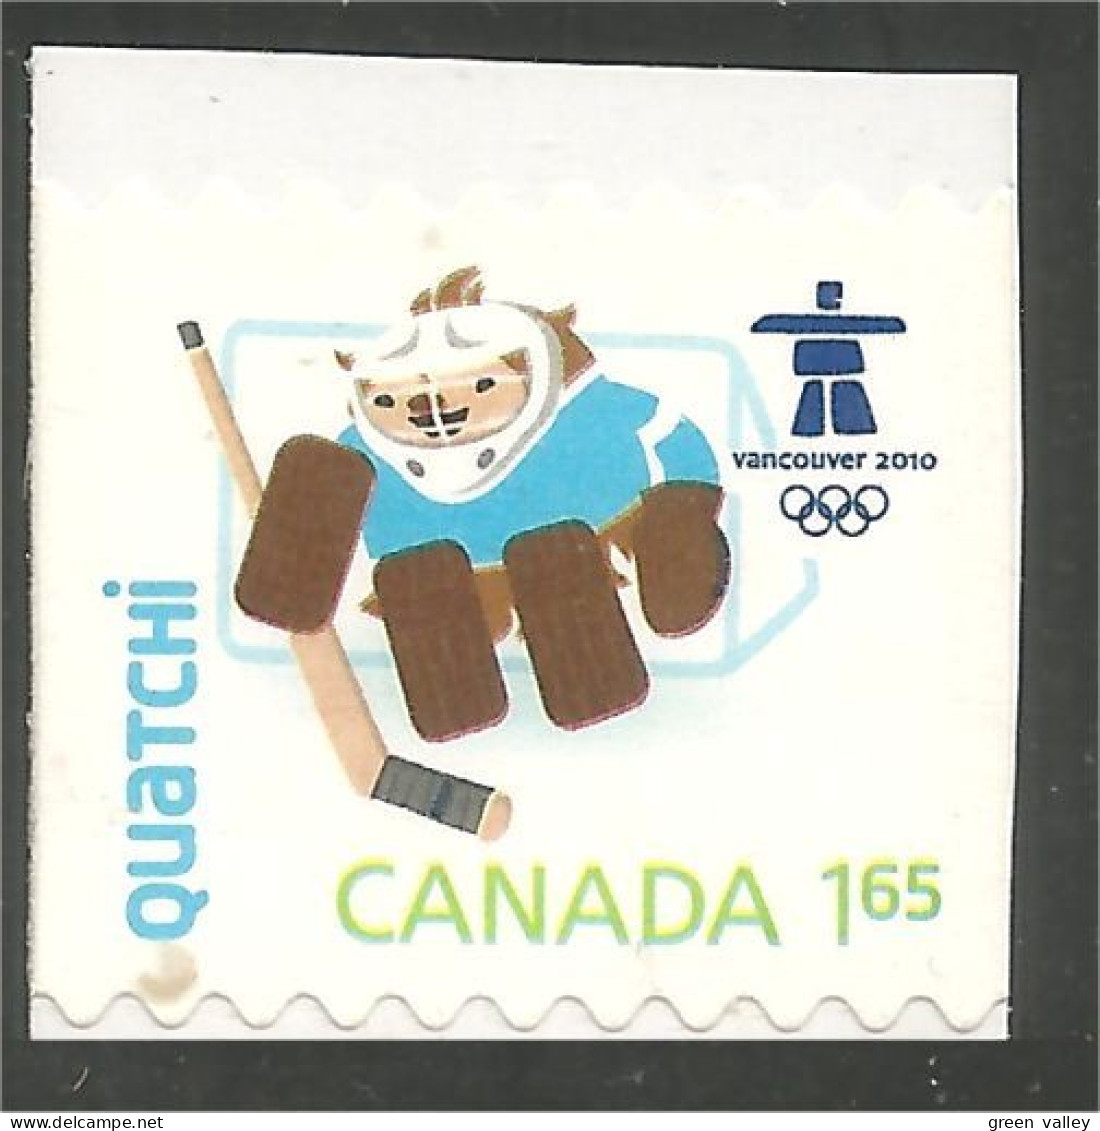 Canada Ice Hockey Glace Booklet Carnet Vancouver 2010 MNH ** Neuf SC (C23-13c) - Winter 2010: Vancouver